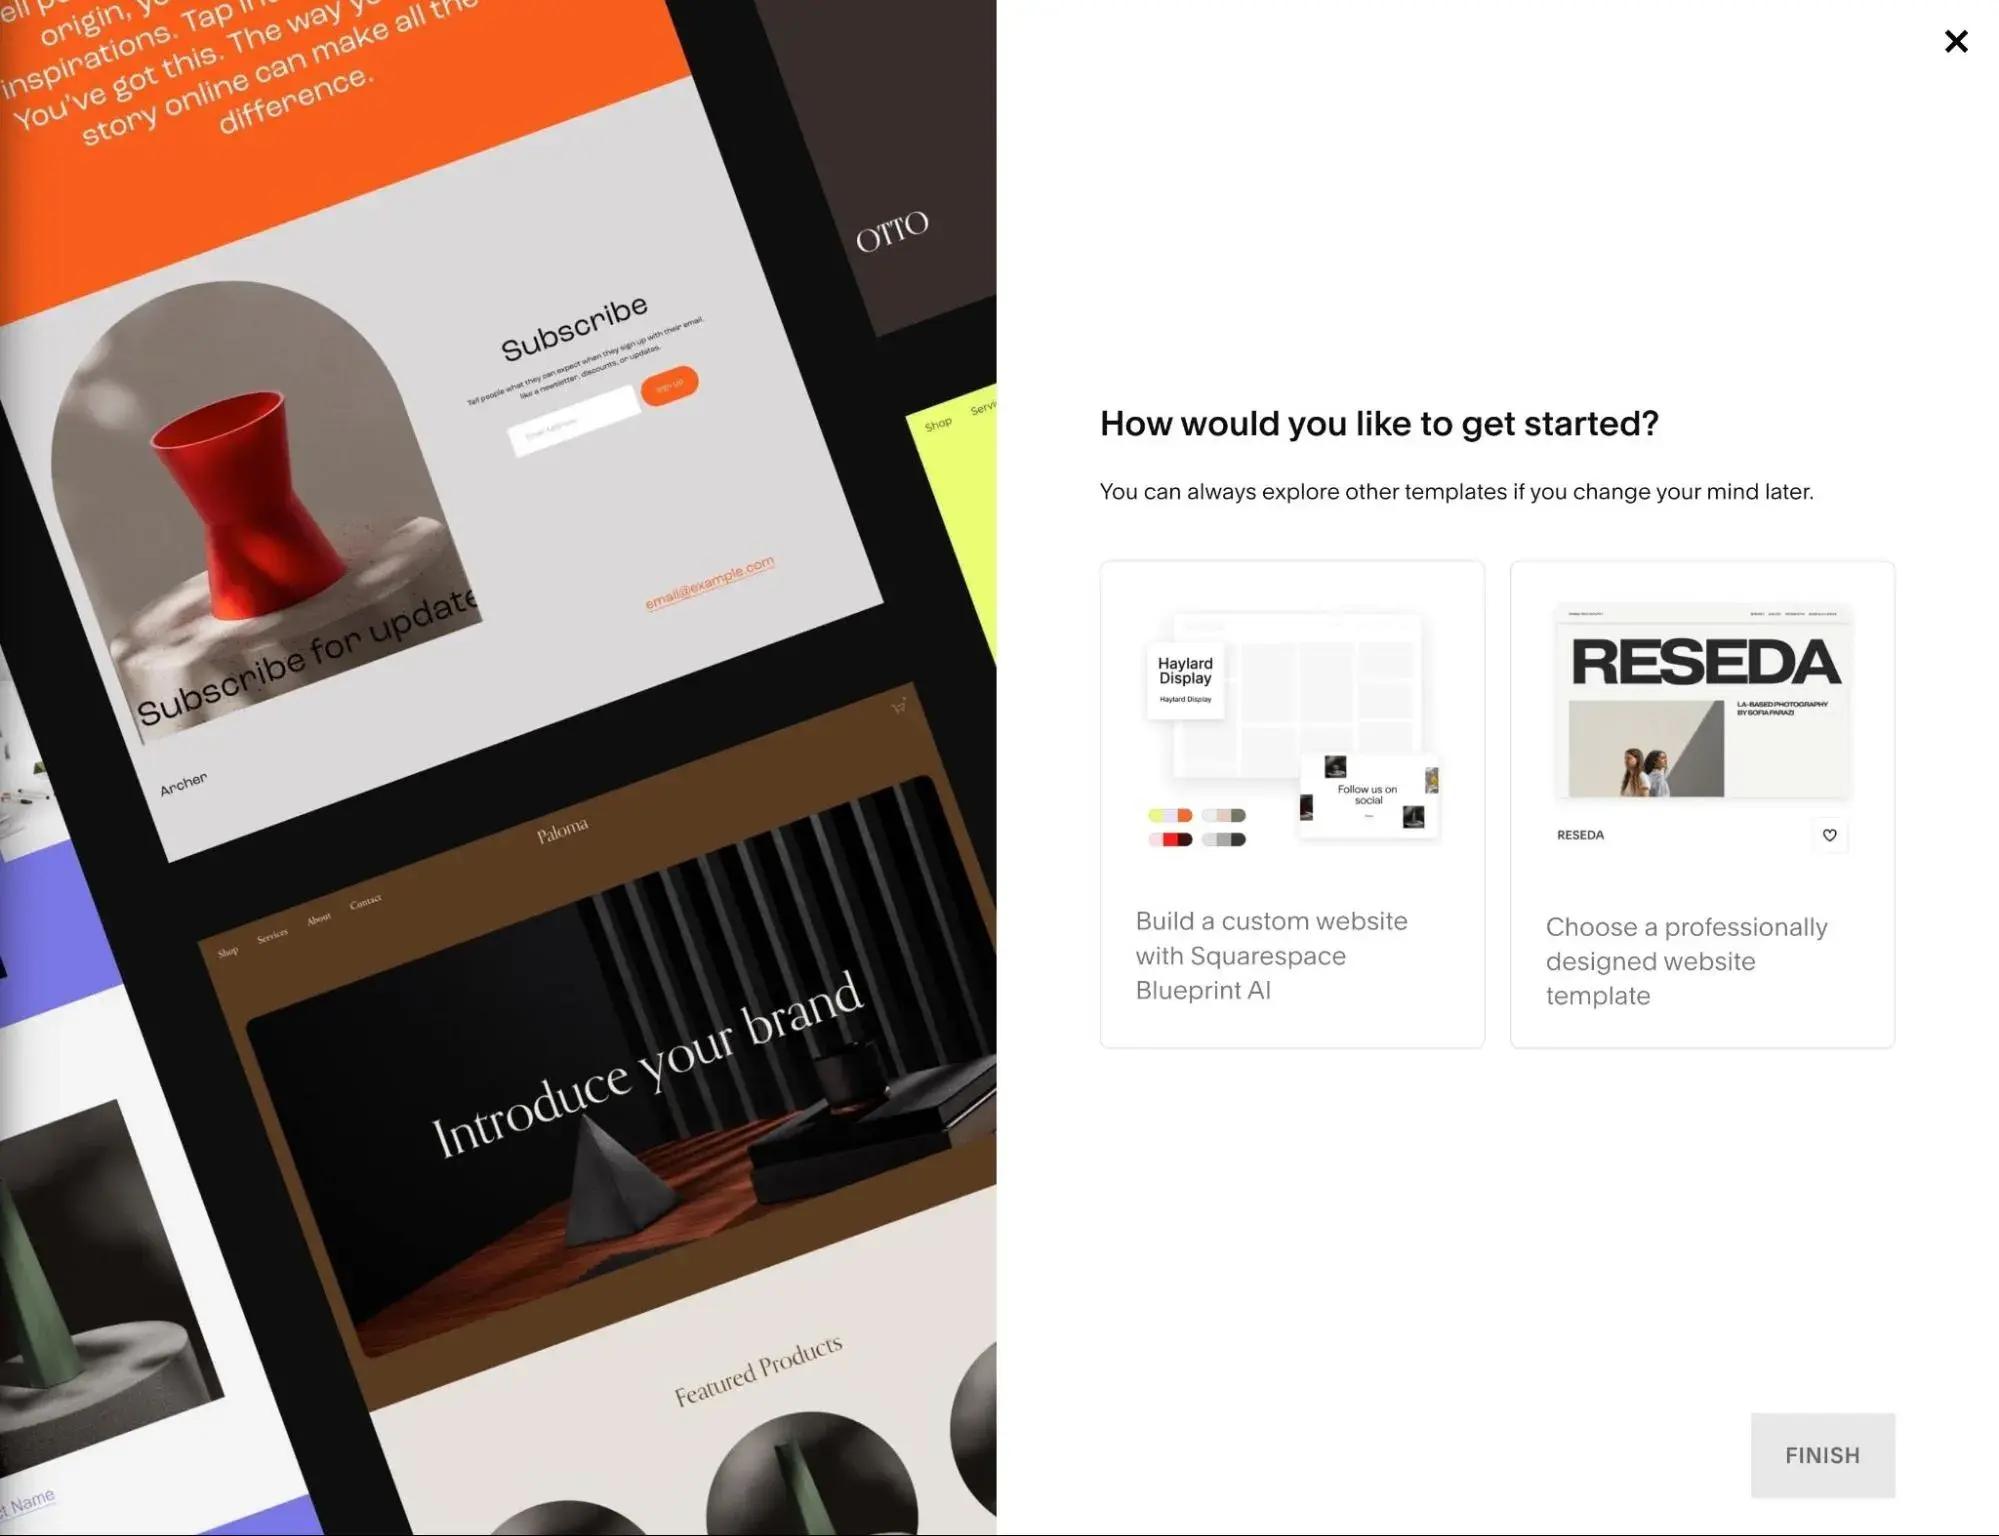 Squarespace offers two different ways to build a website